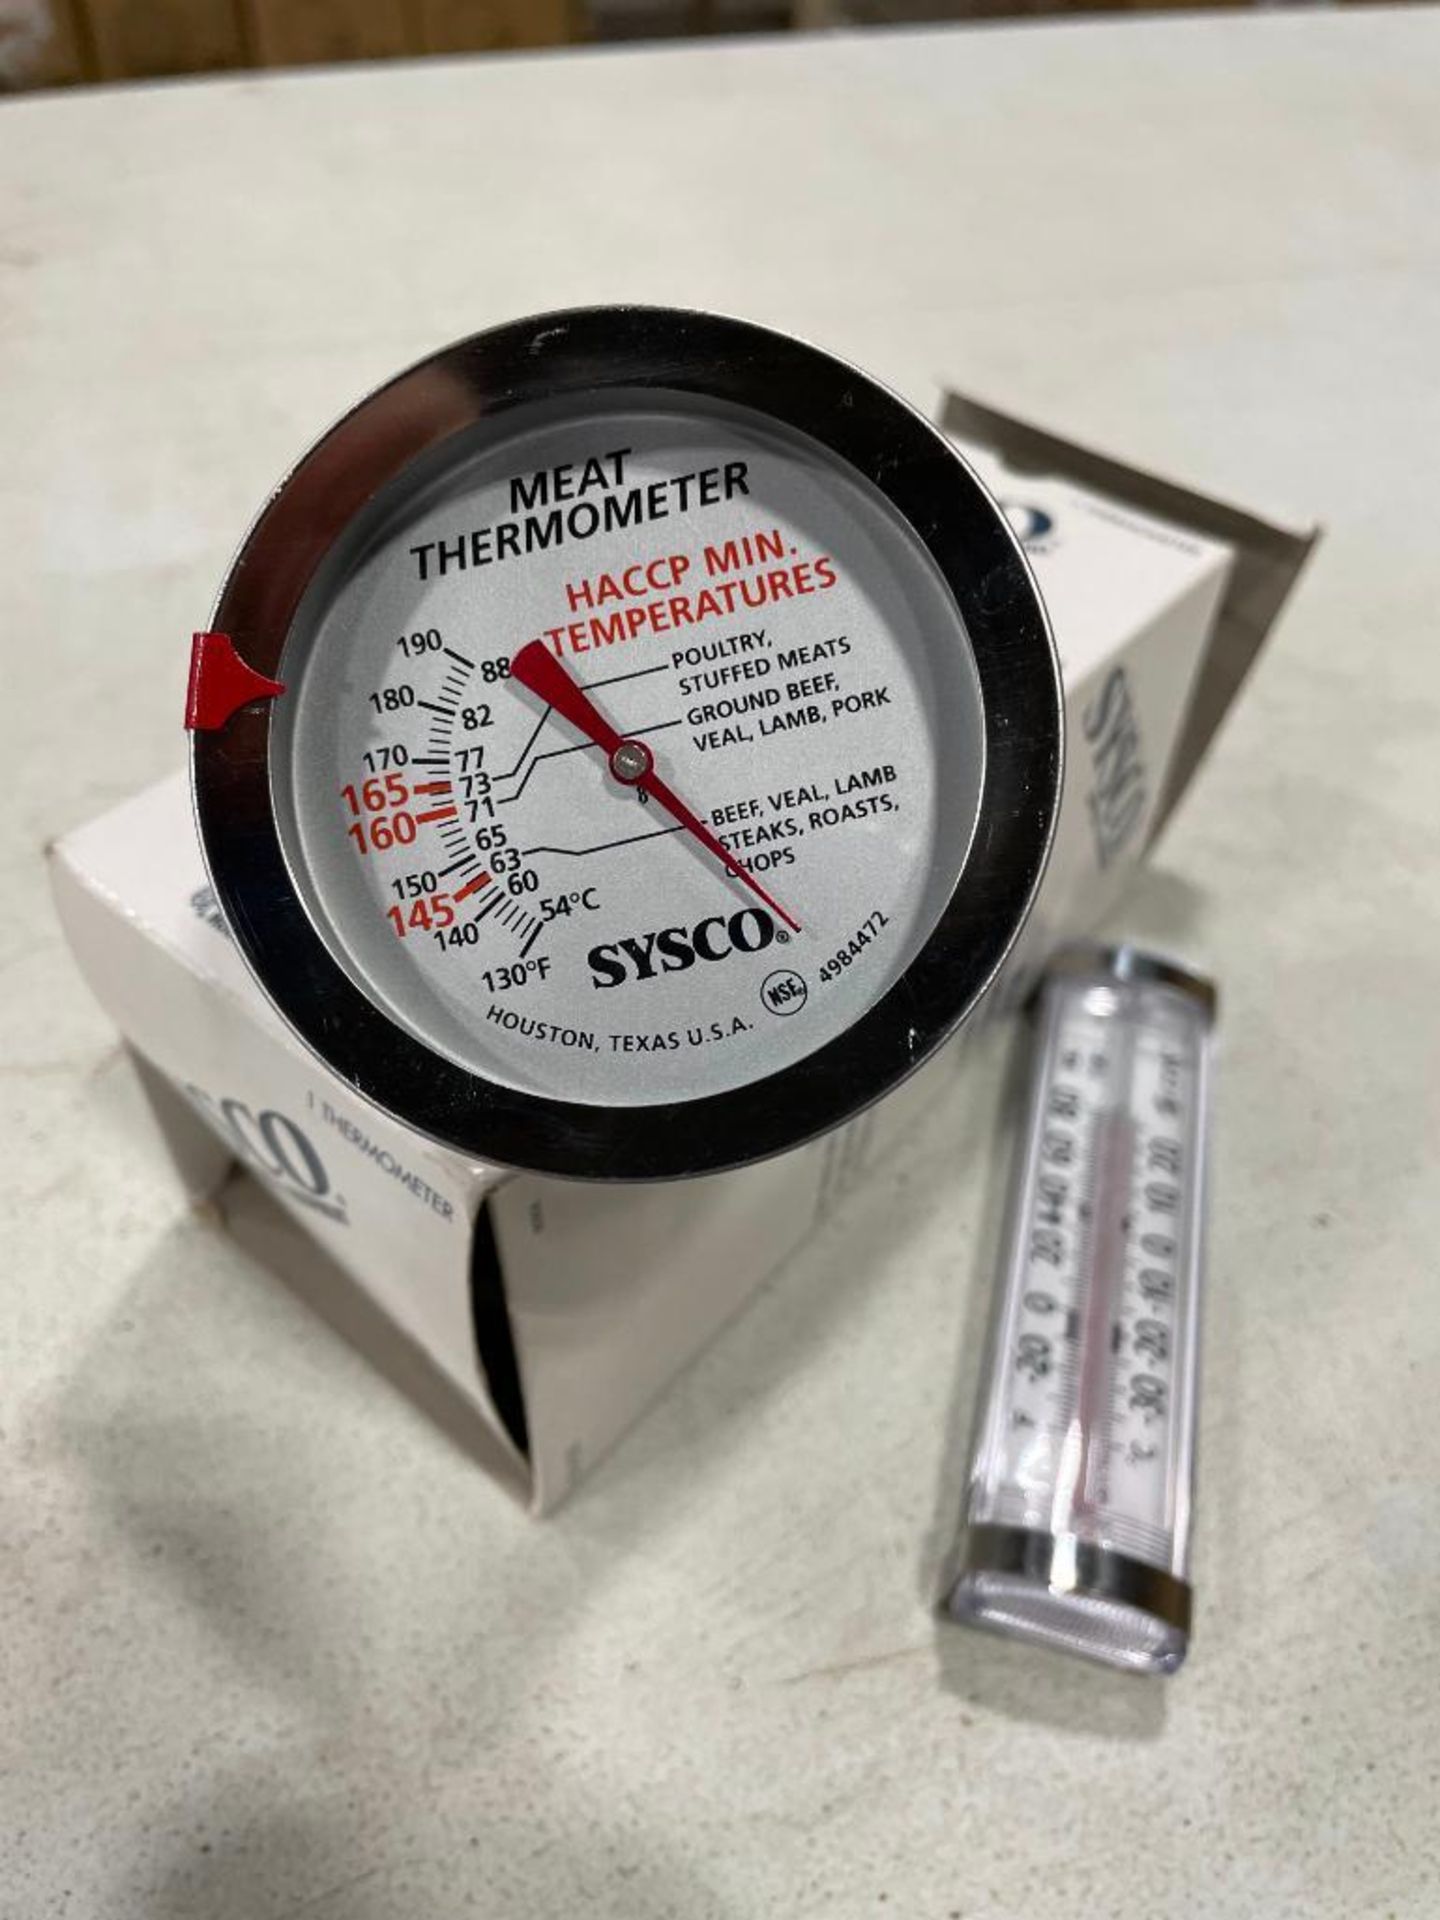 SYSCO MEAT THERMOMETER & COOLER THERMOMETER - Image 2 of 2